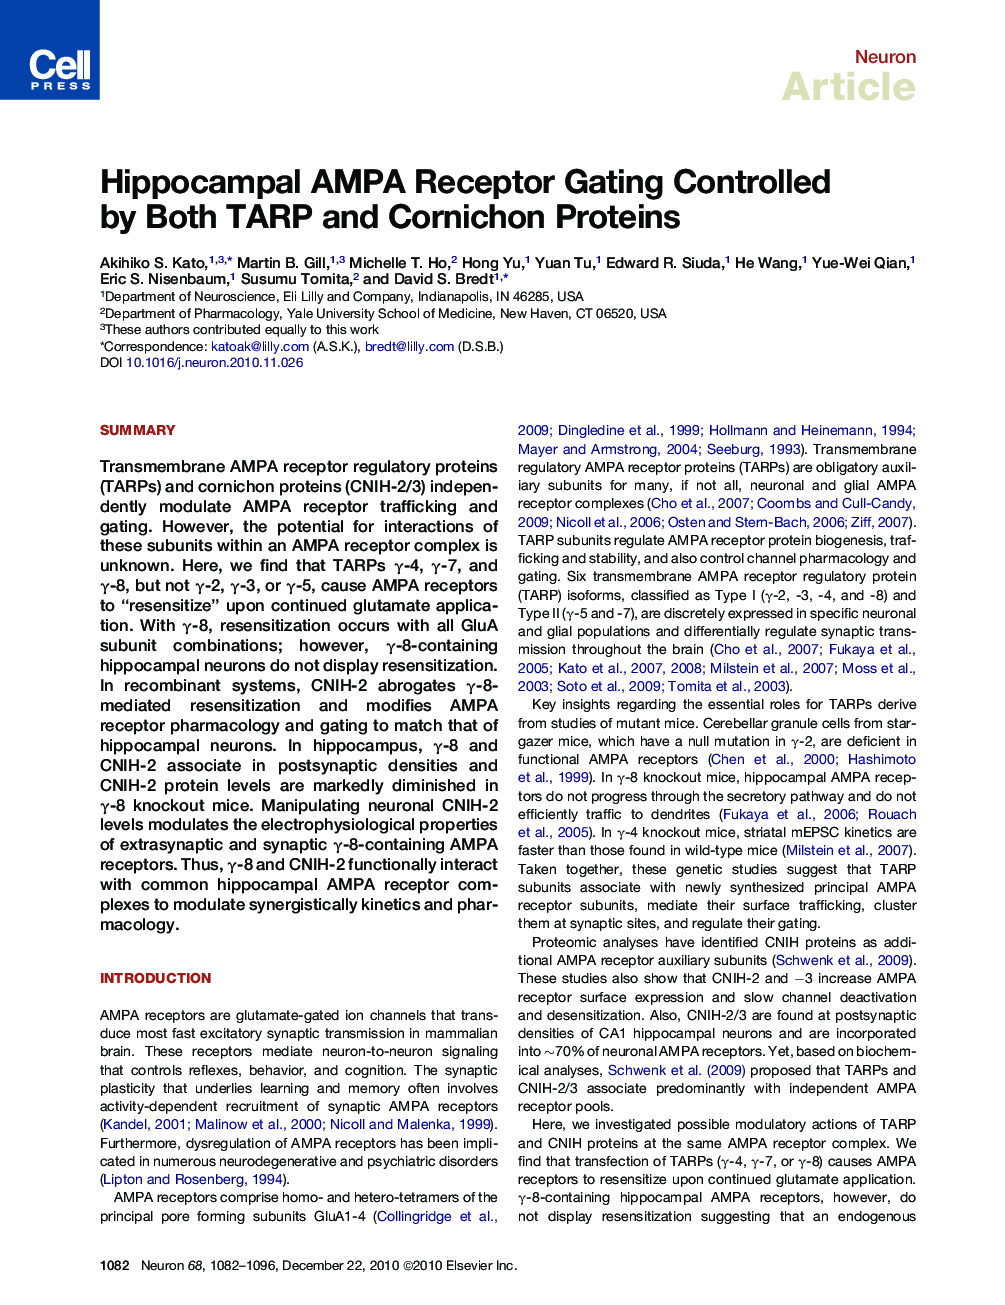 Hippocampal AMPA Receptor Gating Controlled by Both TARP and Cornichon Proteins